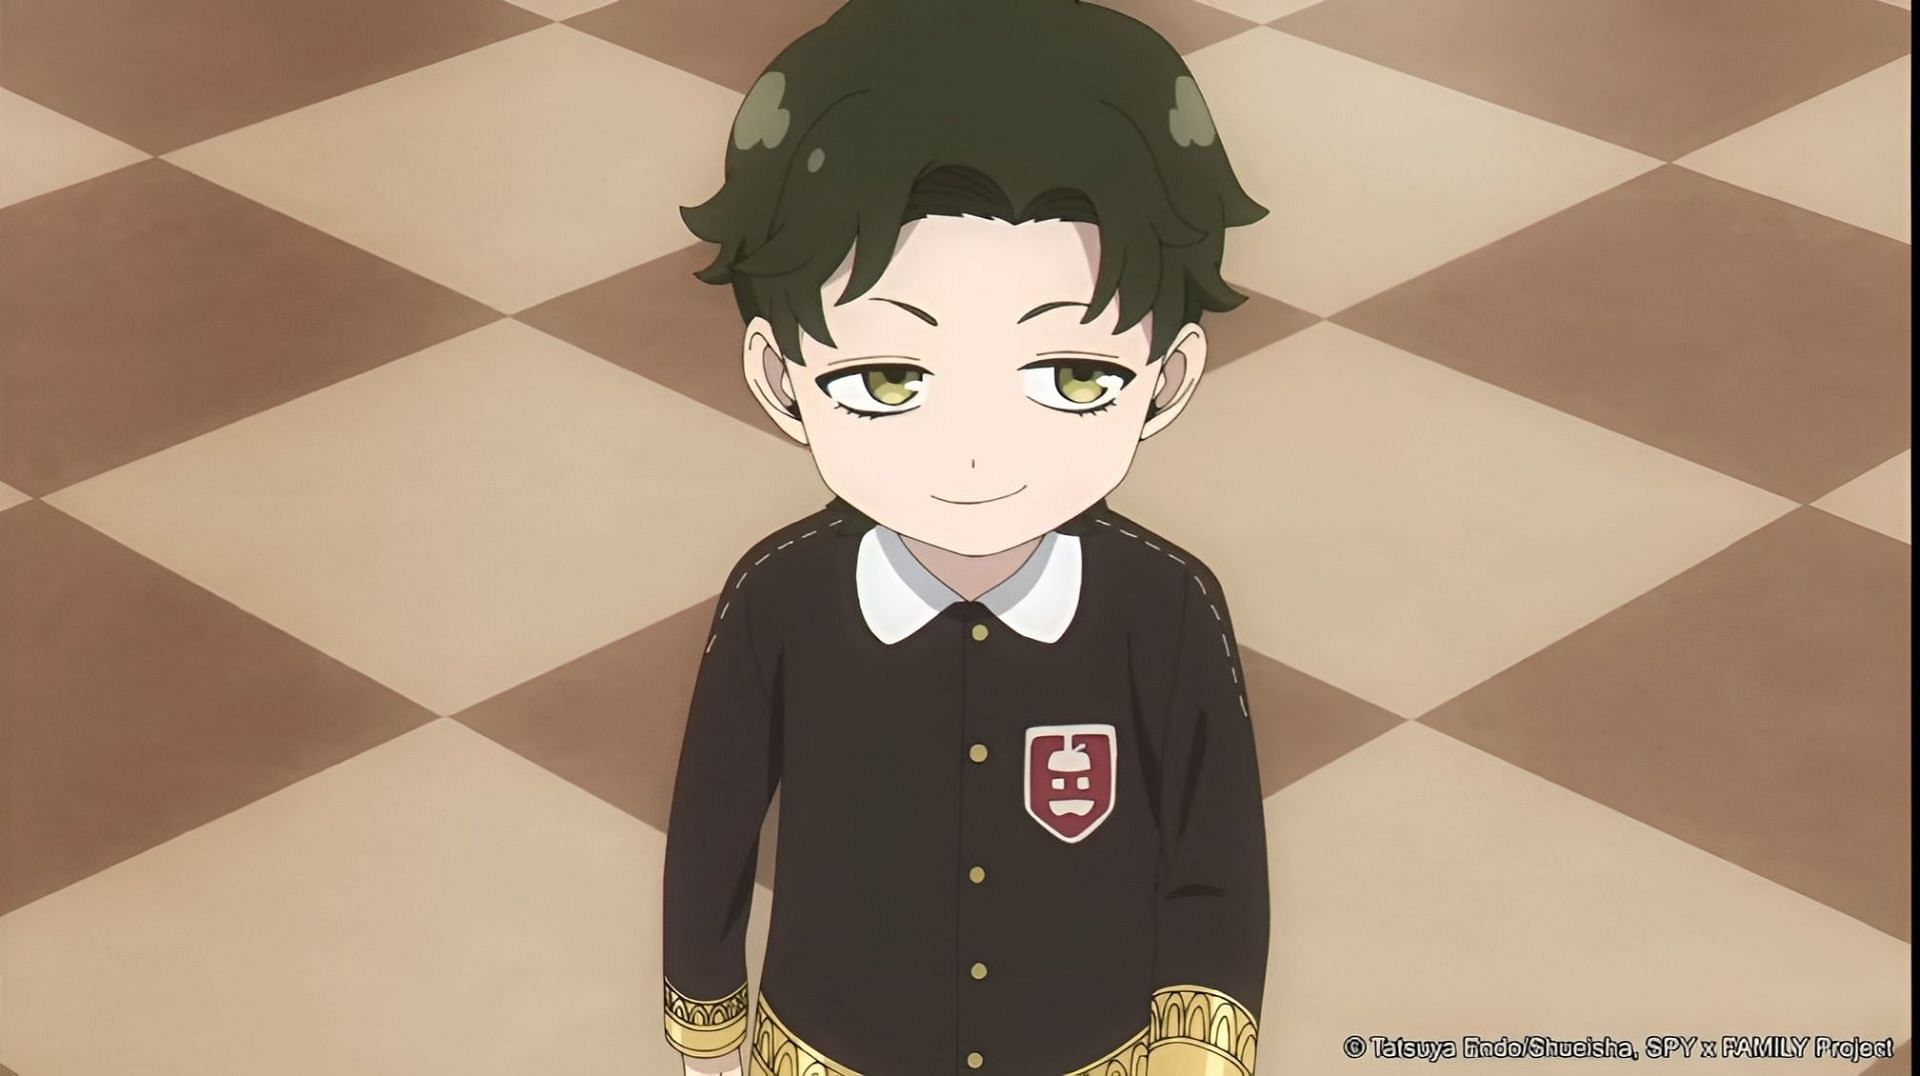 Damian as seen in Episode 6 preview (Image via Muse Asia)